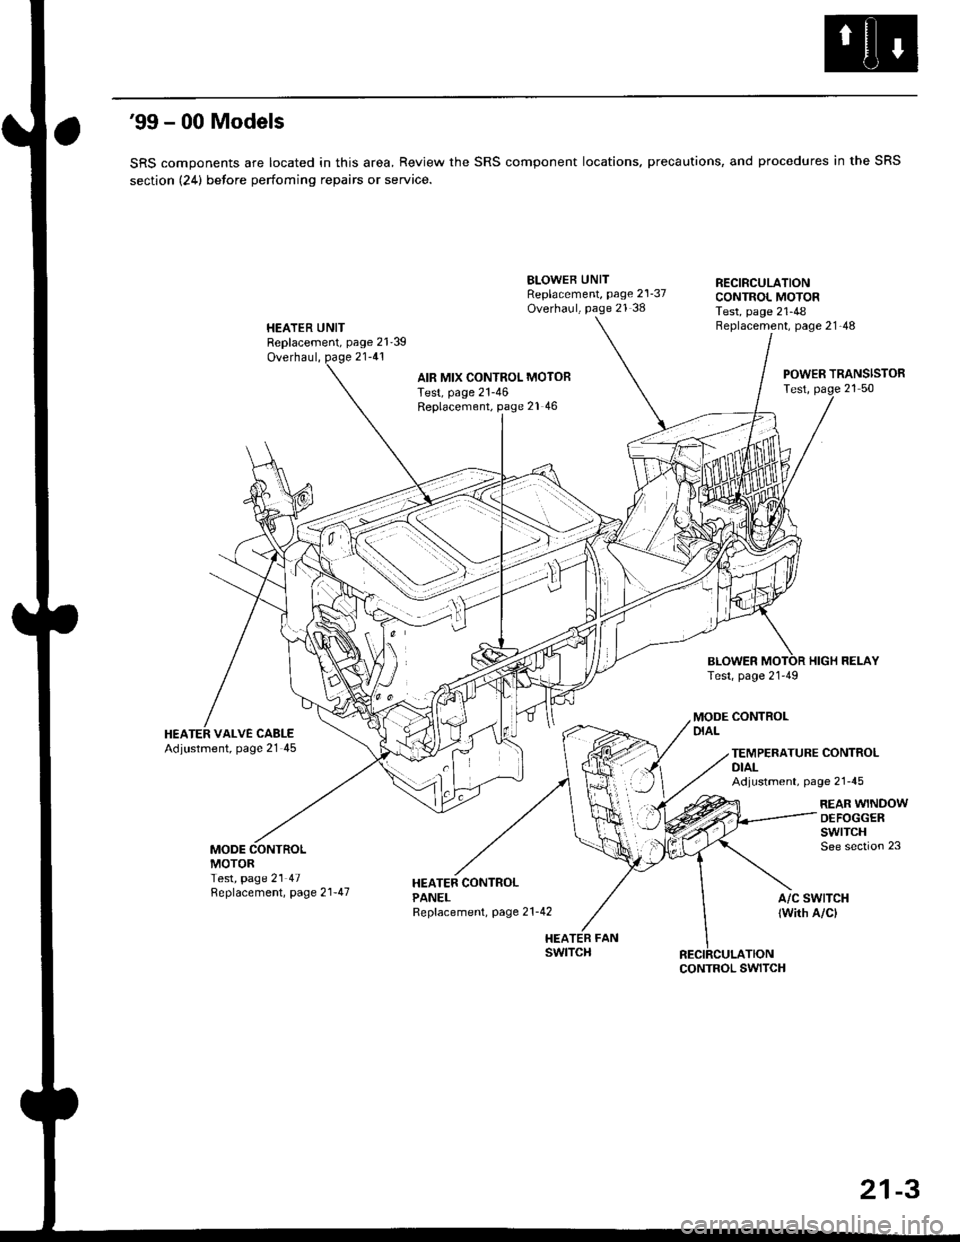 HONDA CIVIC 1996 6.G Service Manual 99 - 00 Models
SRS components are located in this area, Review the SRS component locations, precautions, and procedures in the SRS
section (24) betore perfoming repairs or service.
HEATER UNITReplace